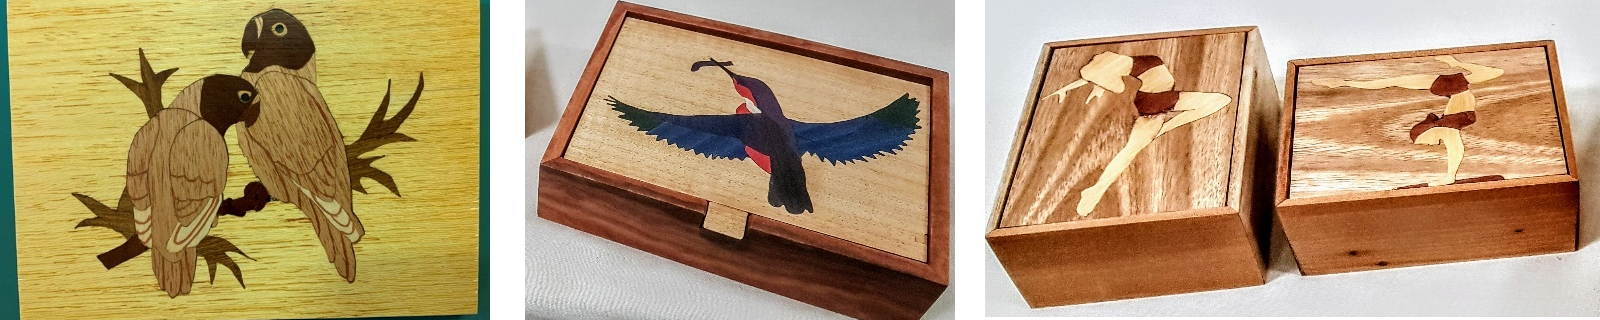 Marquetry examples showing some birds and ladies at the beach